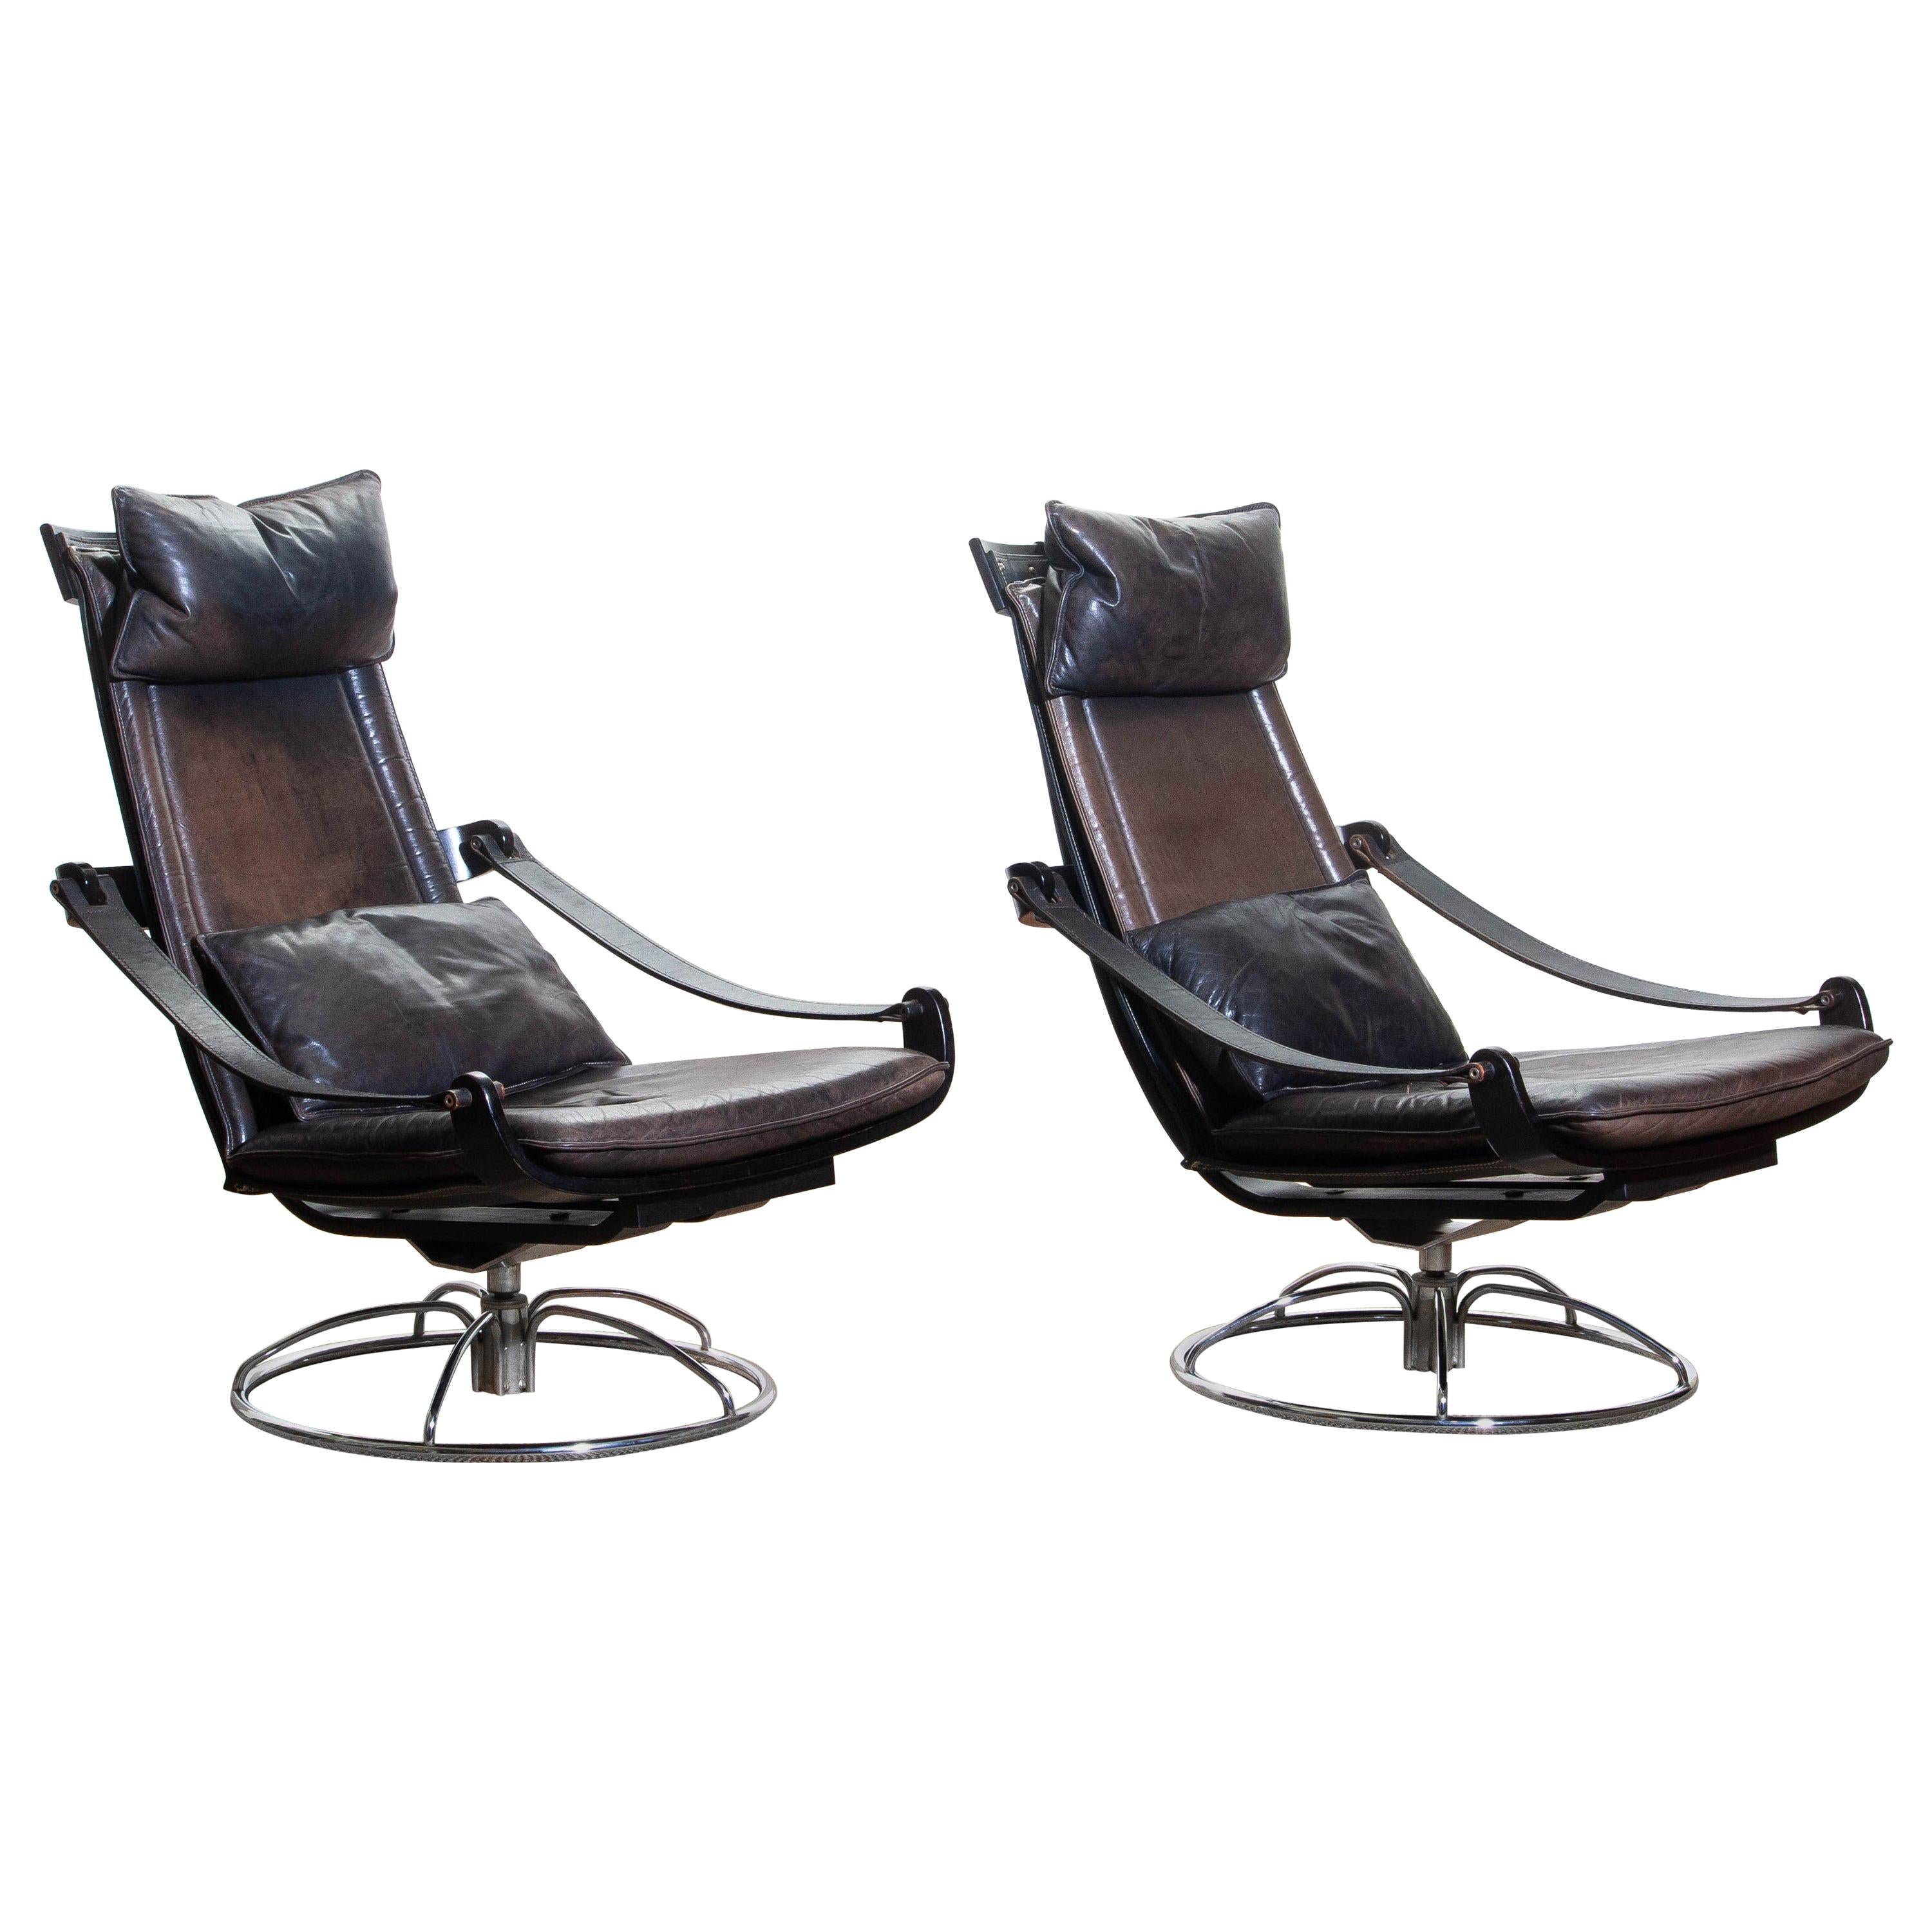 Extremely beautiful and artistic set of two swivel easy / lounge chairs designed by Åke Fribytter for Nelo, Sweden.
These high quality chairs features a plywood frame and brown leather cushions and a chromed metal base.
The armrests are made of